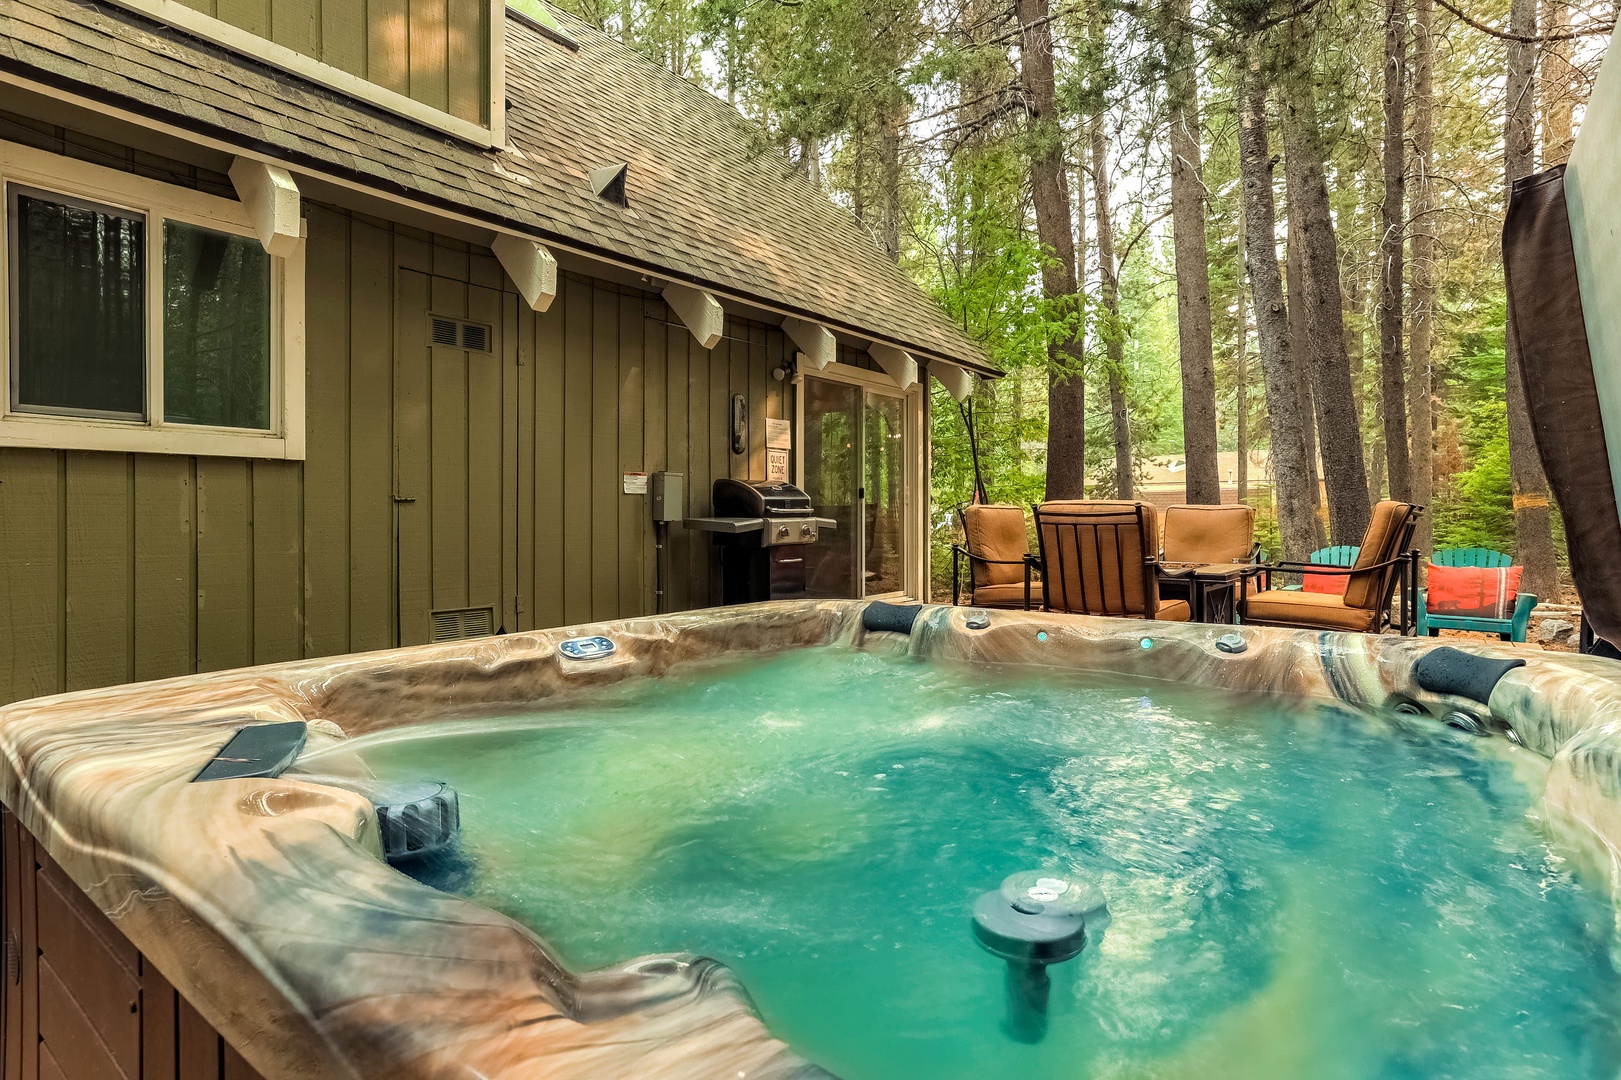 Backyard with gas BBQ grill, hot tub and seating